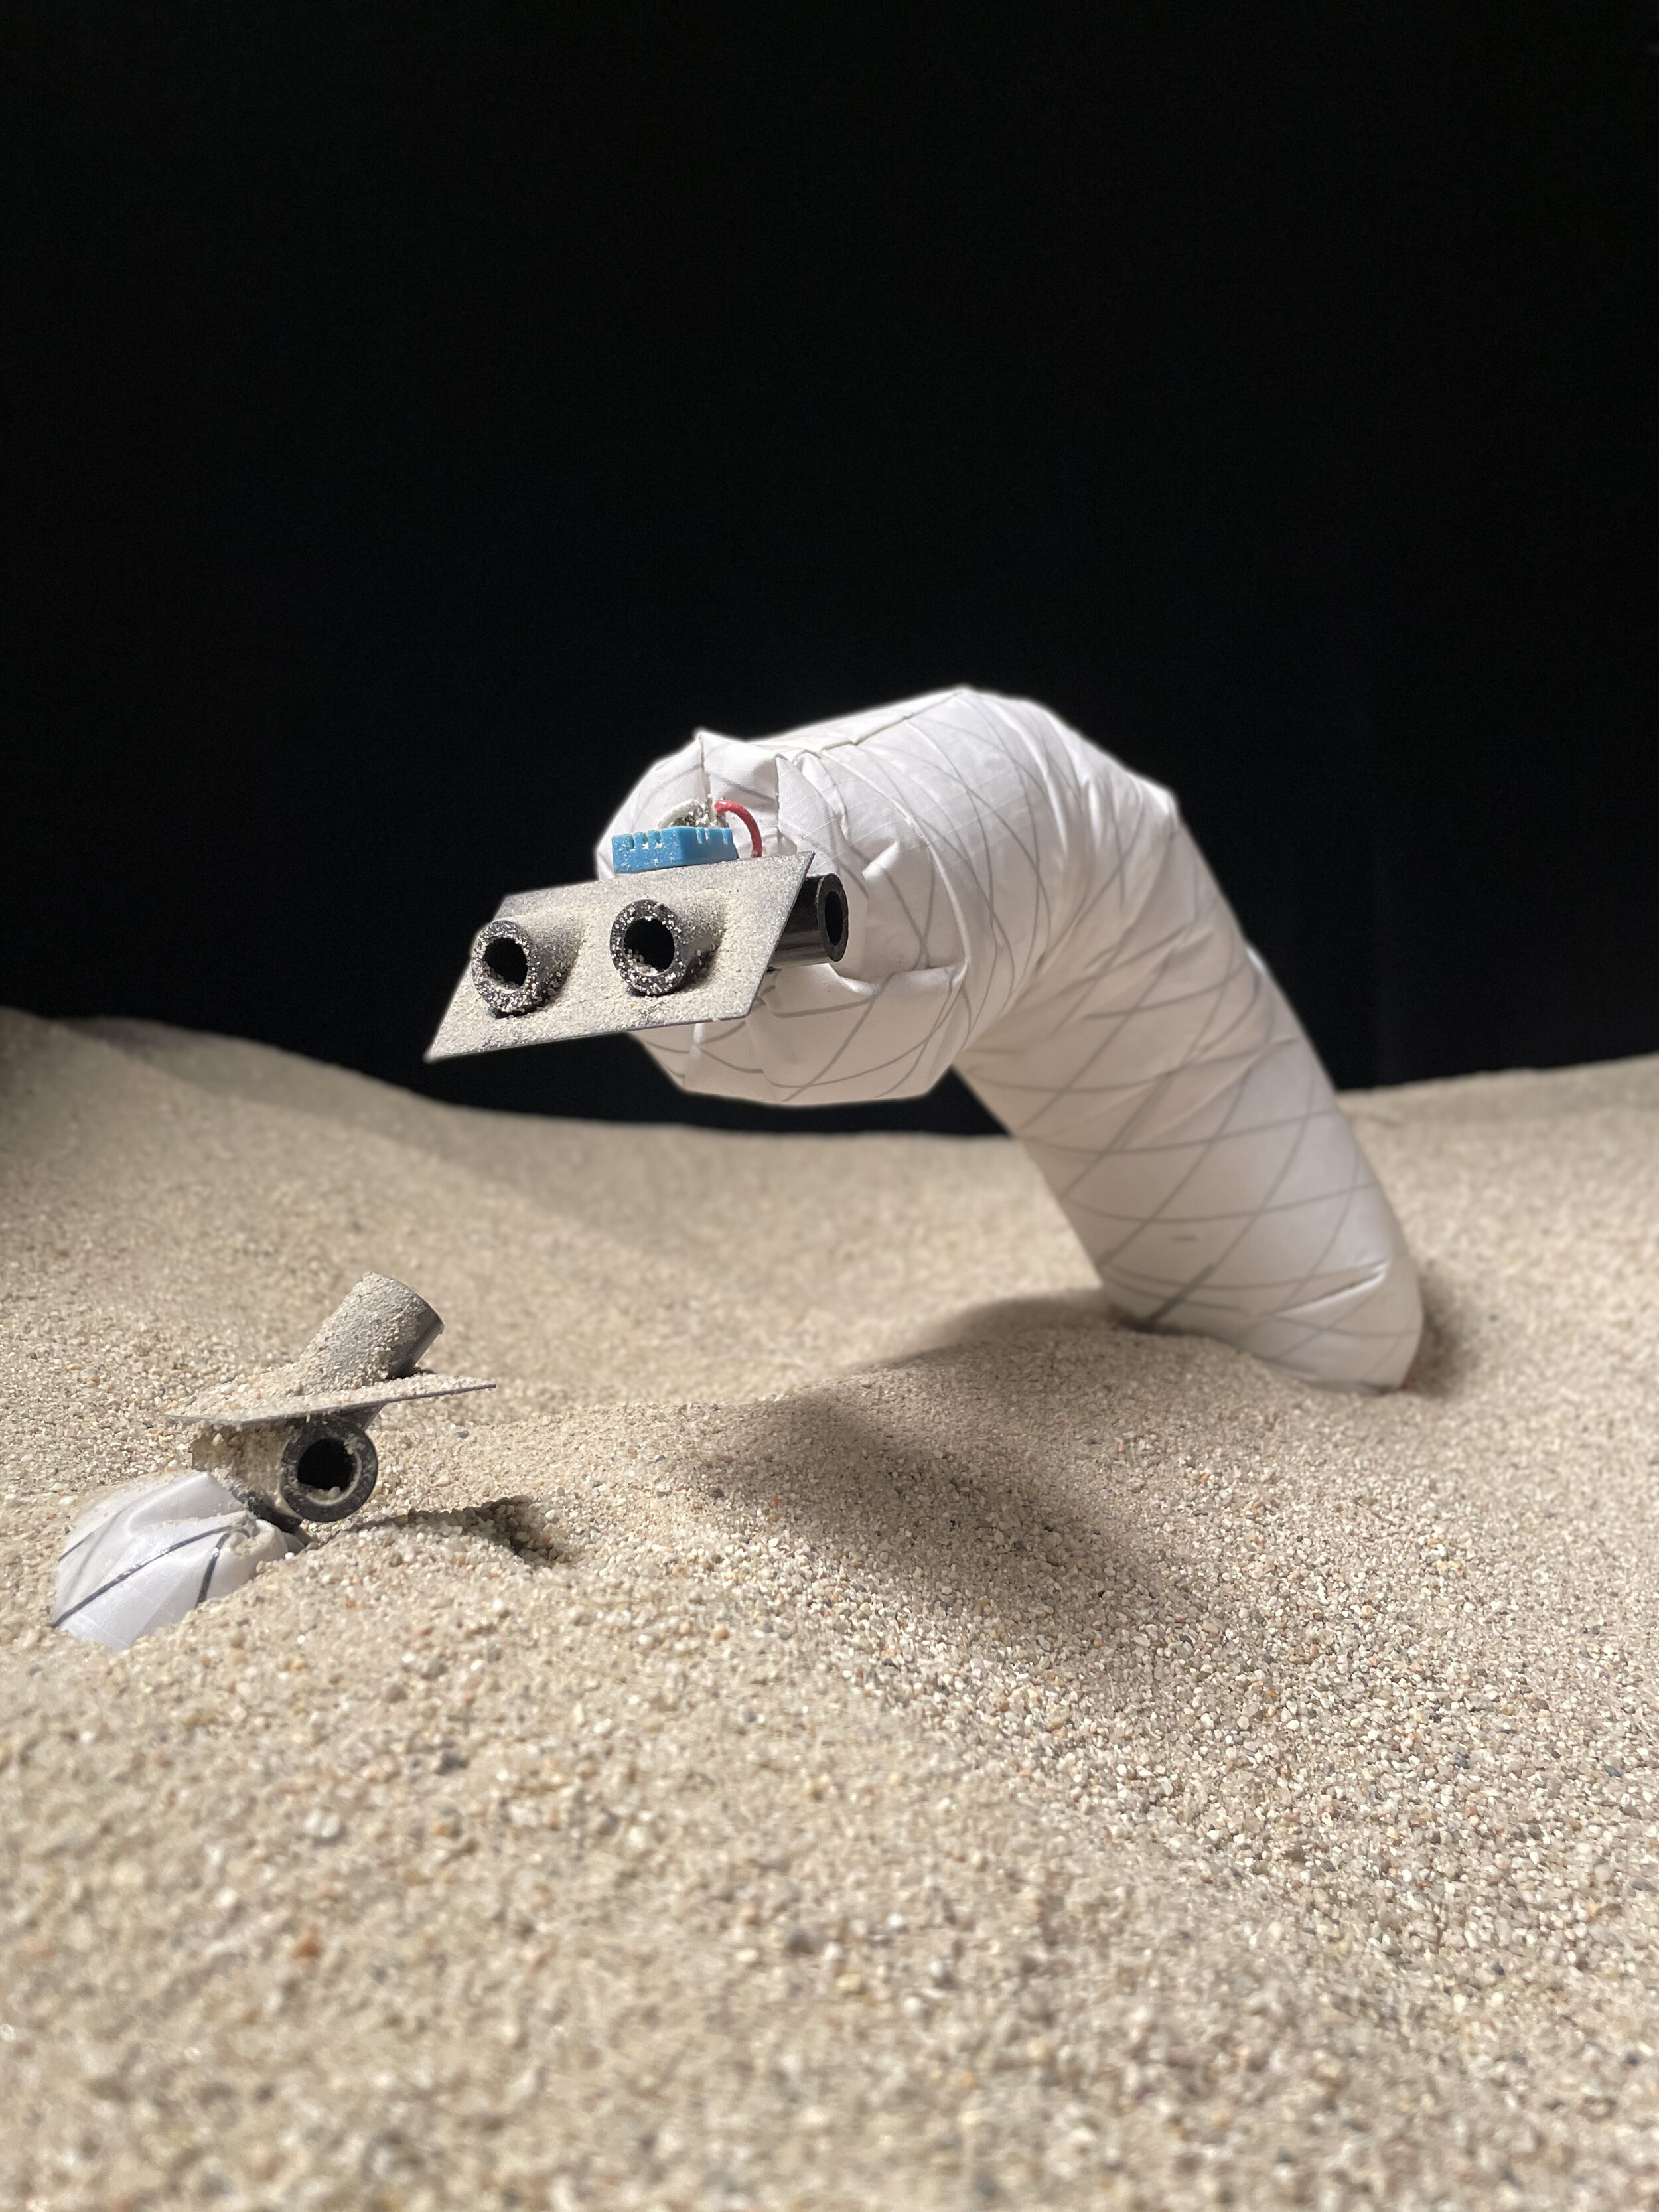 Researchers explore the shallow underground world with a burrowing soft robot